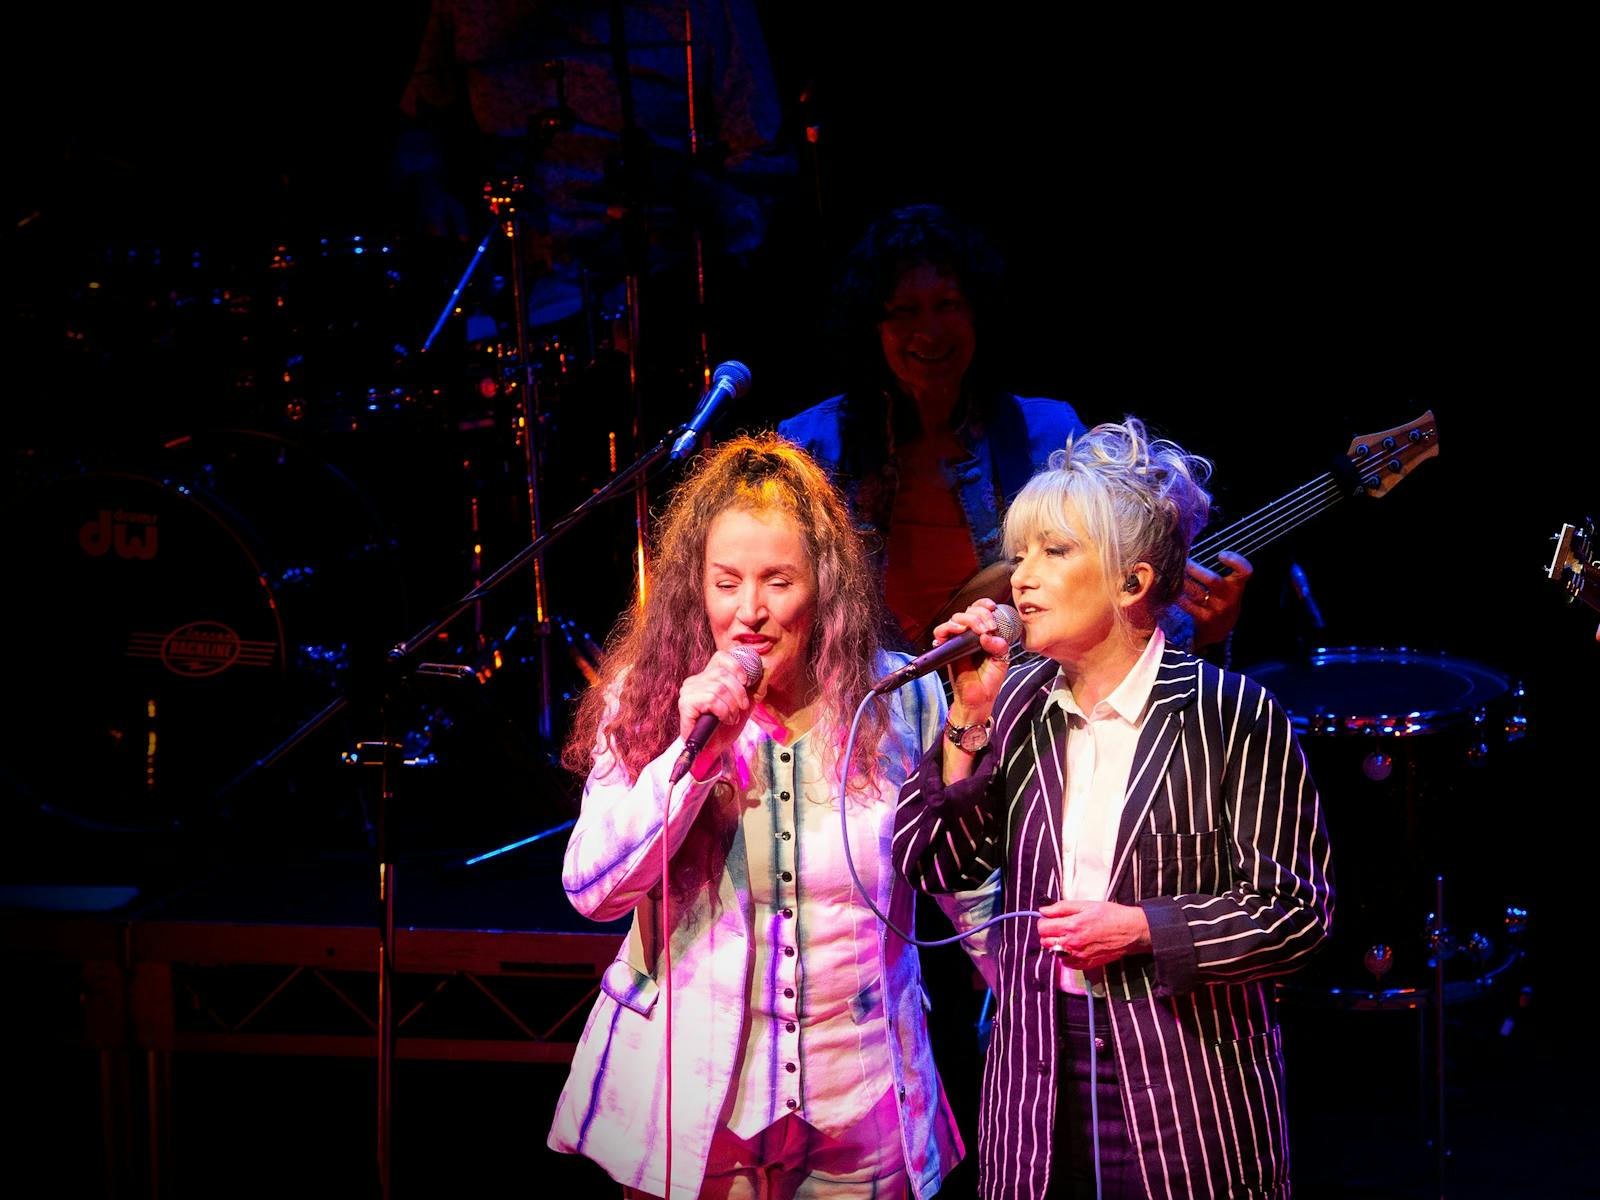 Two women - Wendy Matthews and Grace Knight singing on microphones on a darkened stage.